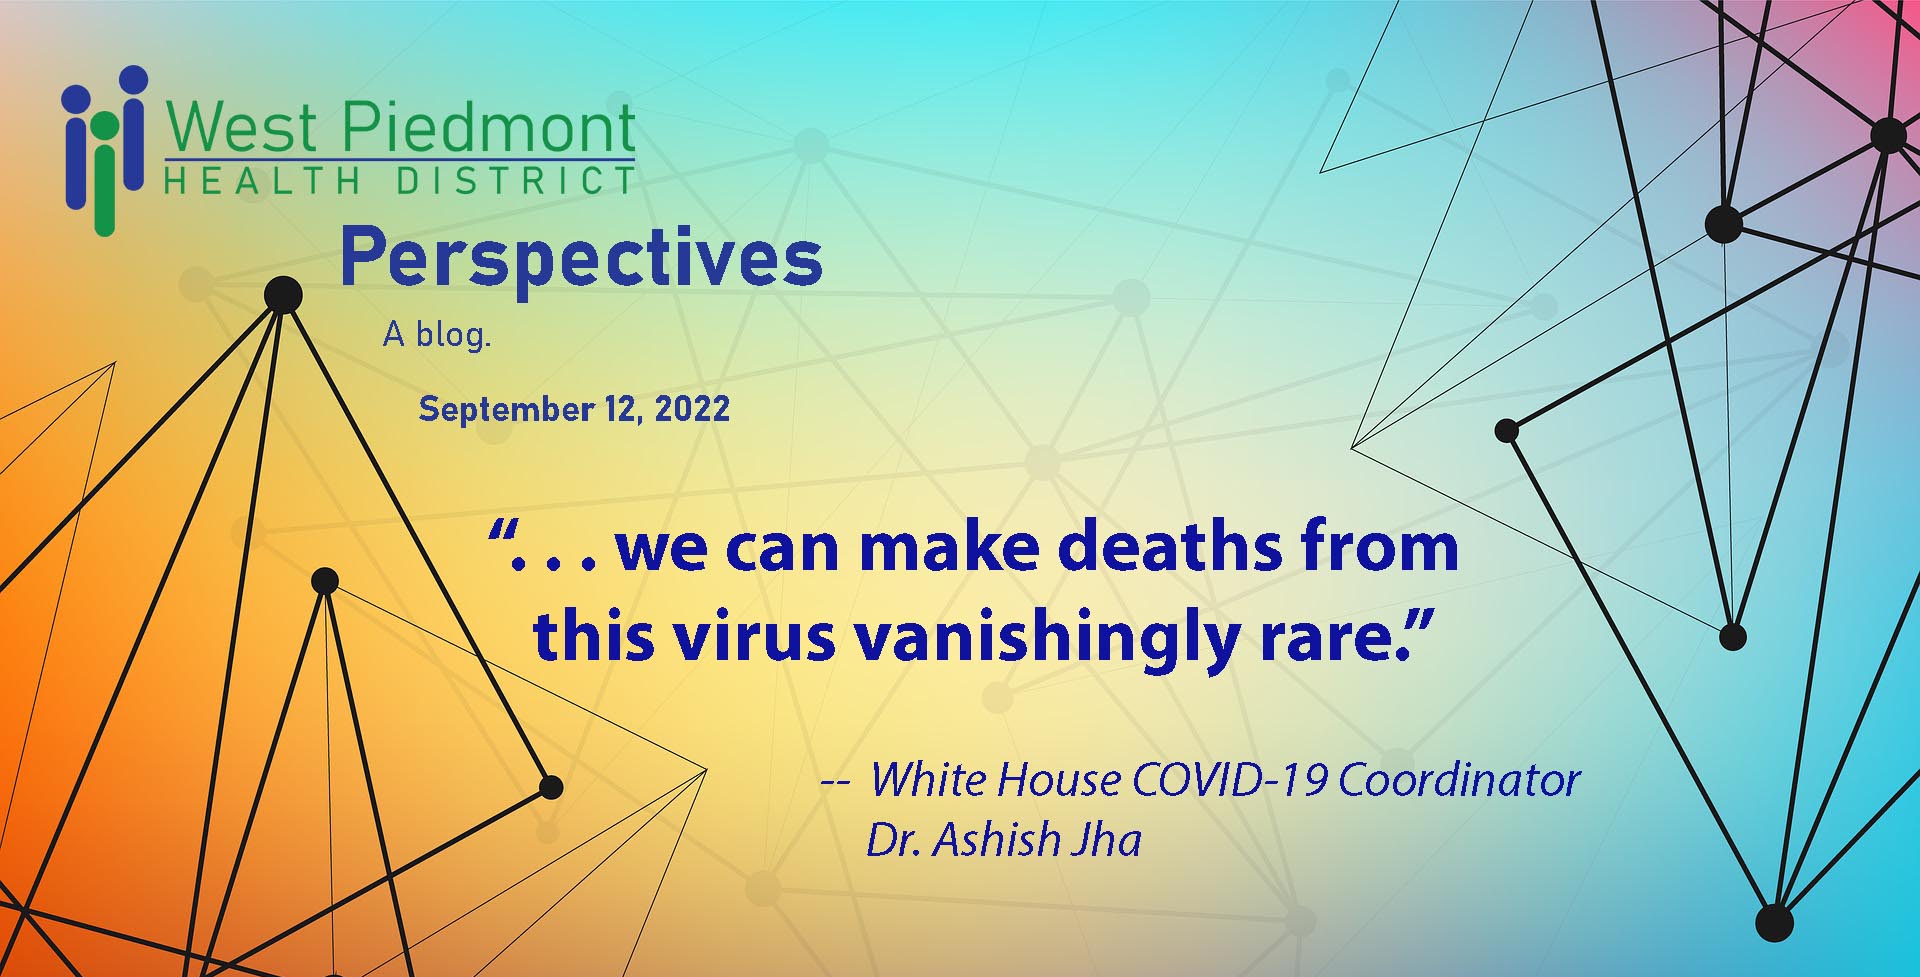 WP Perspectives cover quote: "we can make deaths from this virus vanishingly rare." Dr. Jha, White House COVID-19 Coordinator.